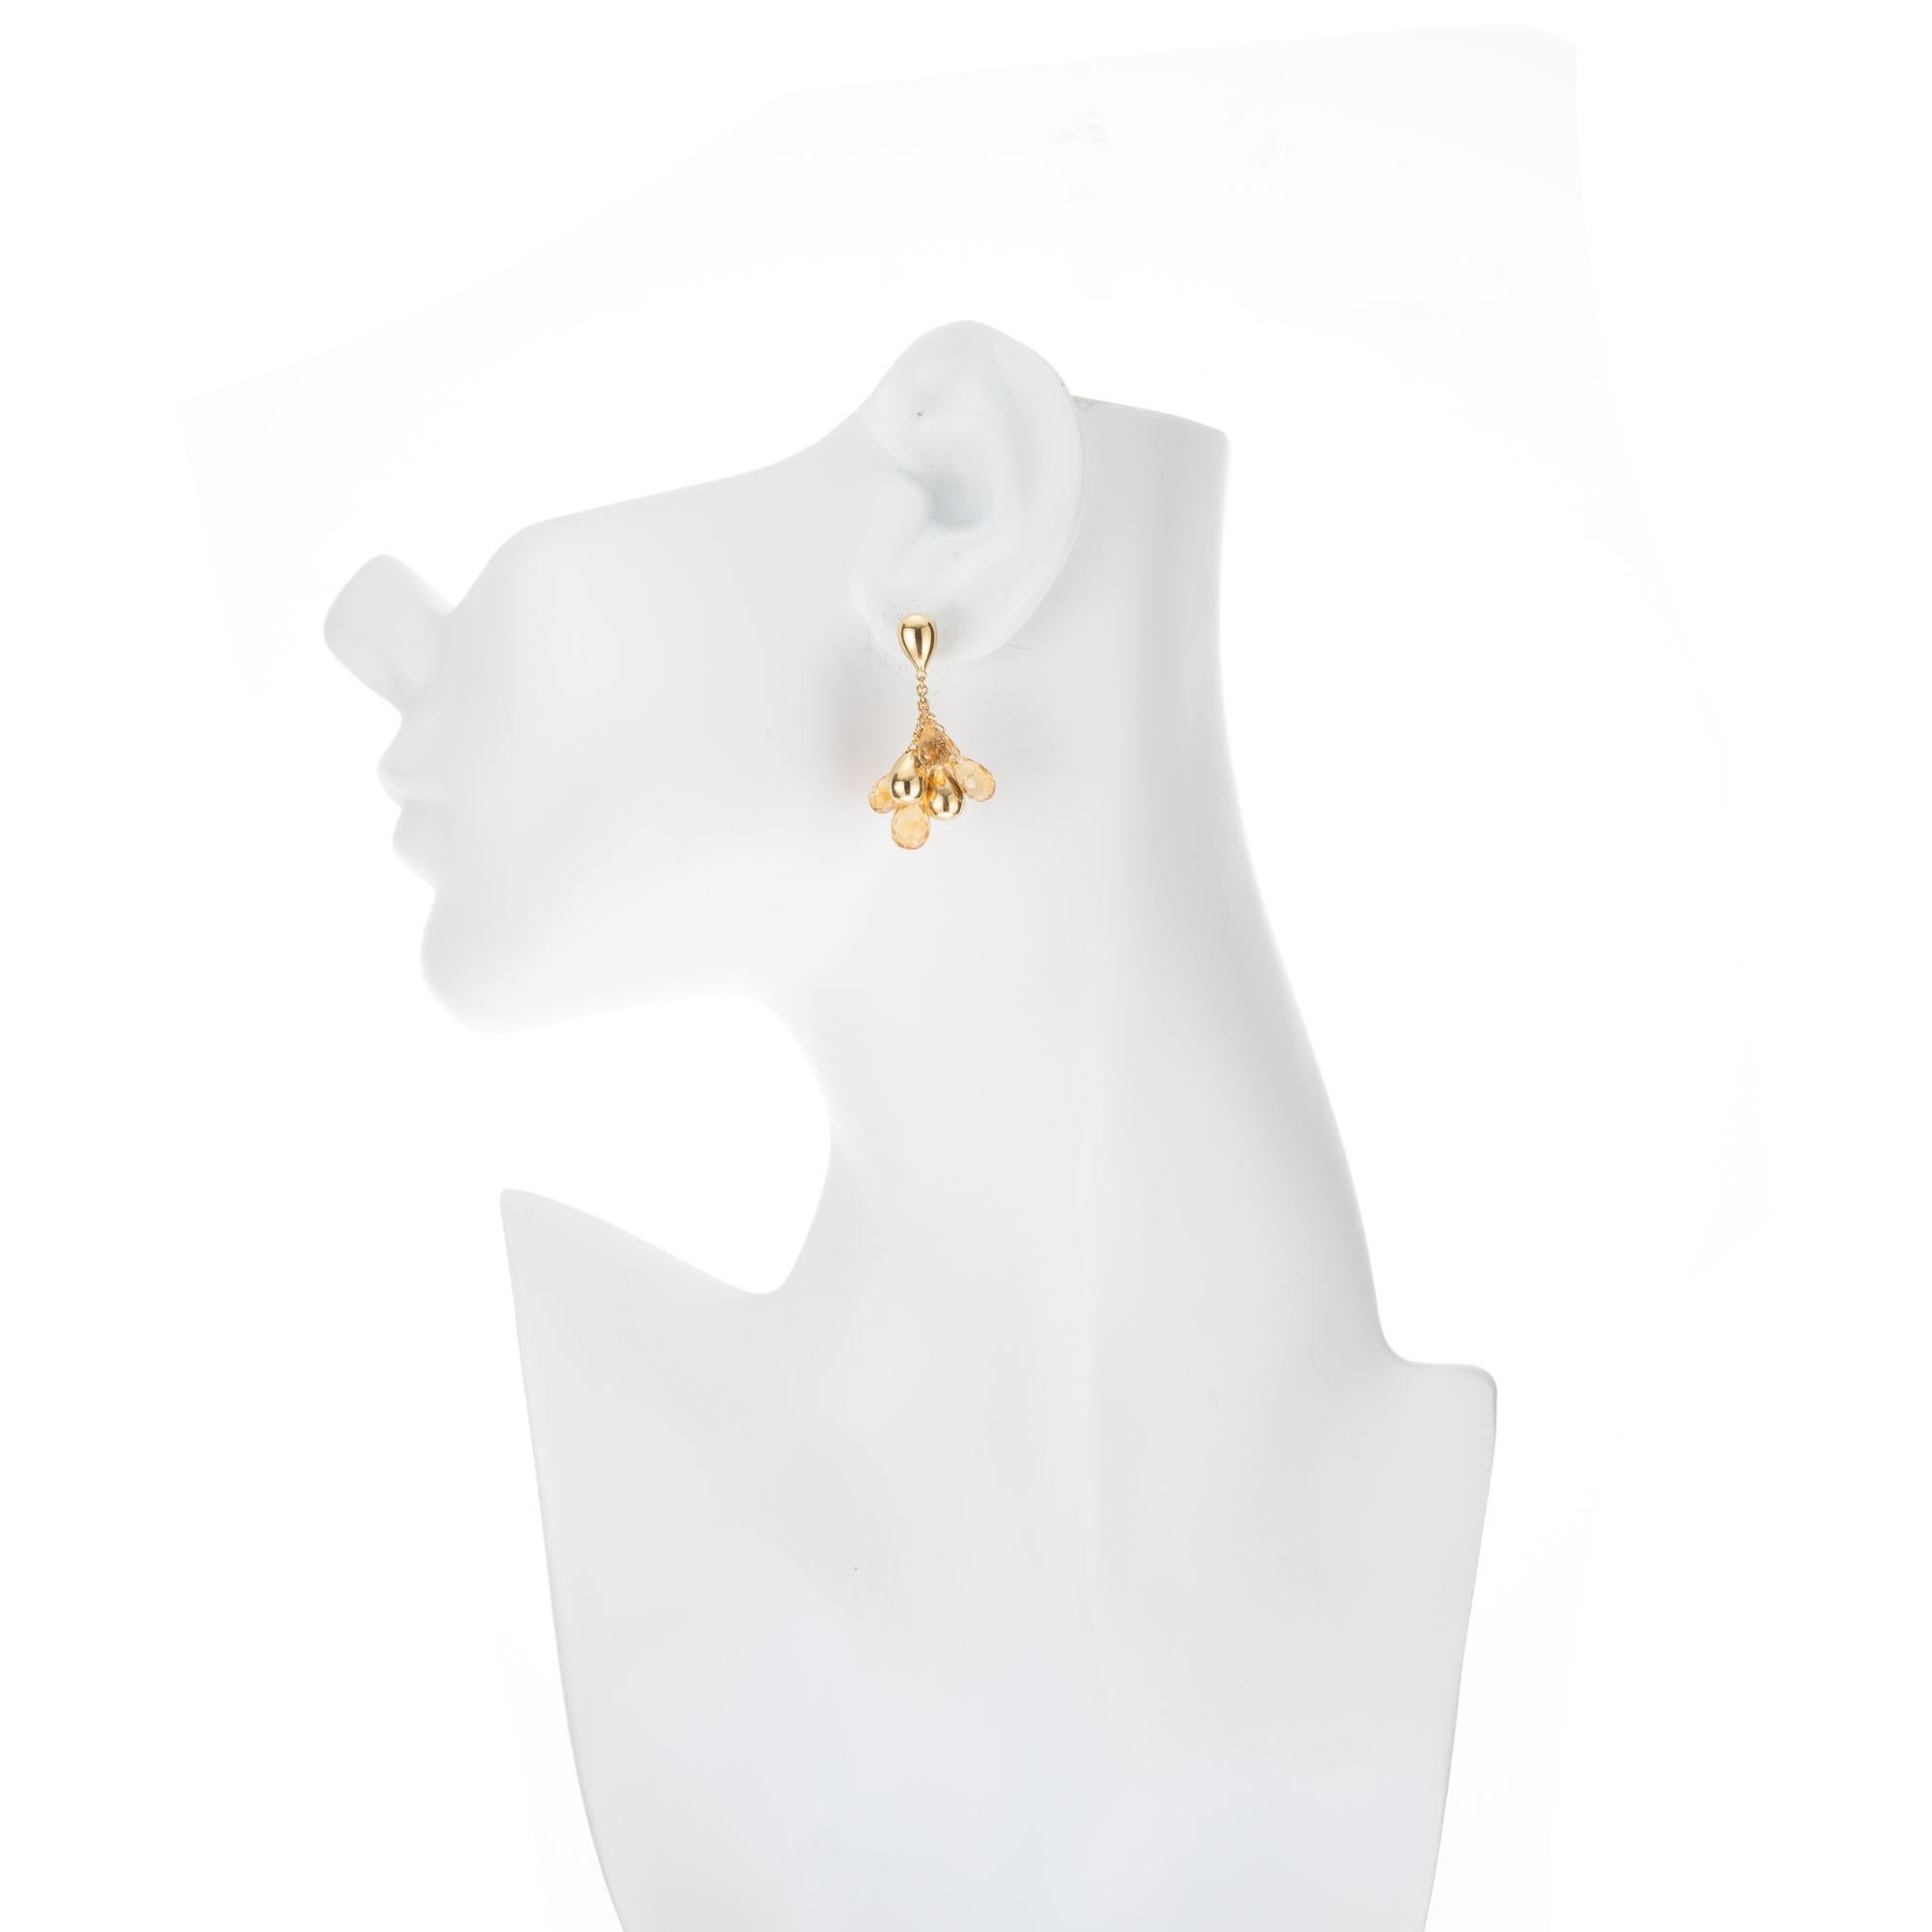 Briolette Cut Marco Bicego 10.00 Carat Citrine Yellow Gold Paradise Drop Earrings For Sale